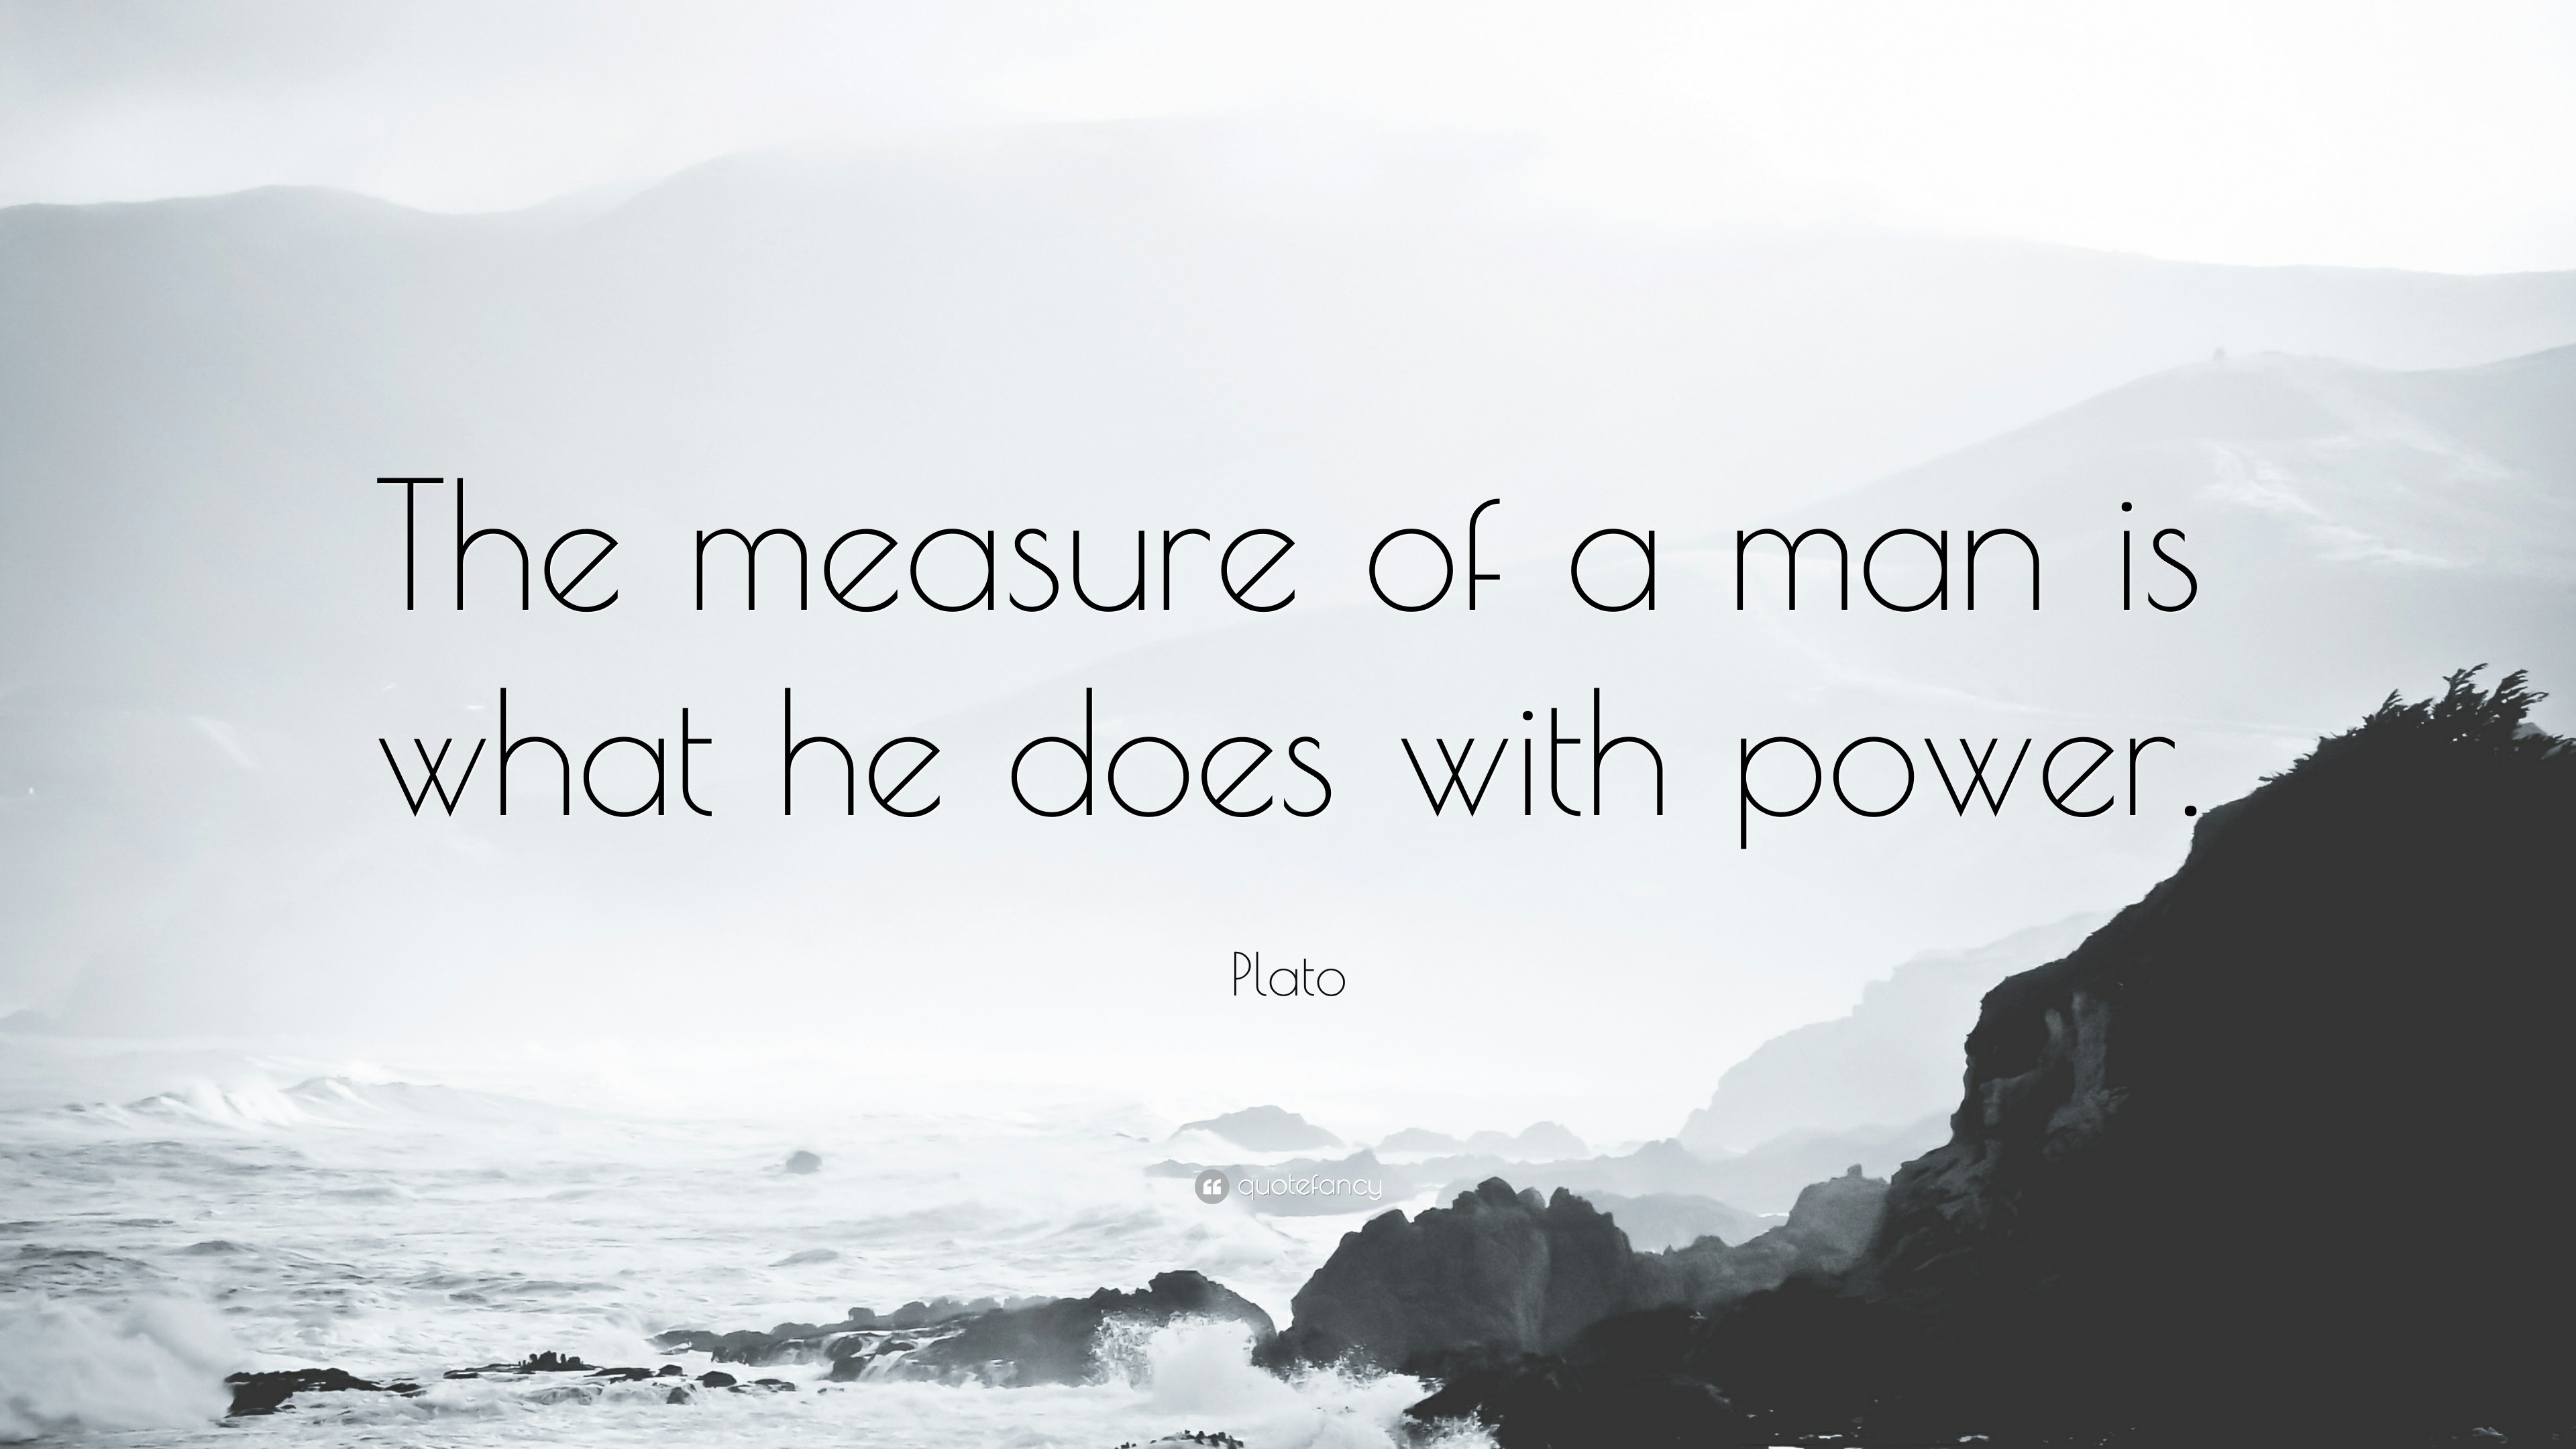 a measure of a man